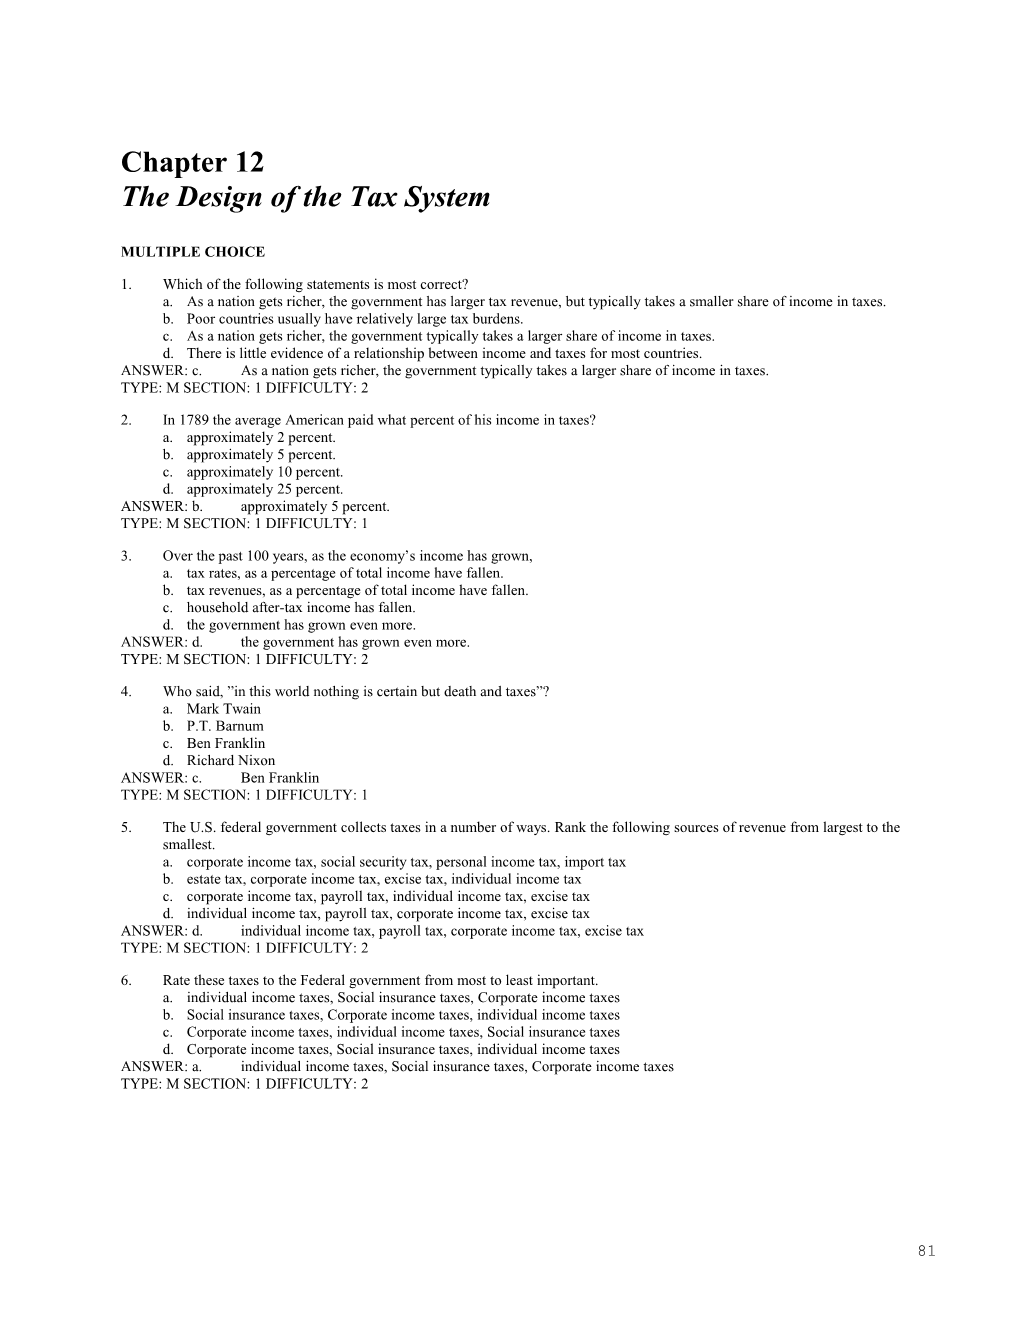 Chapter 12/The Design of the Tax System 1